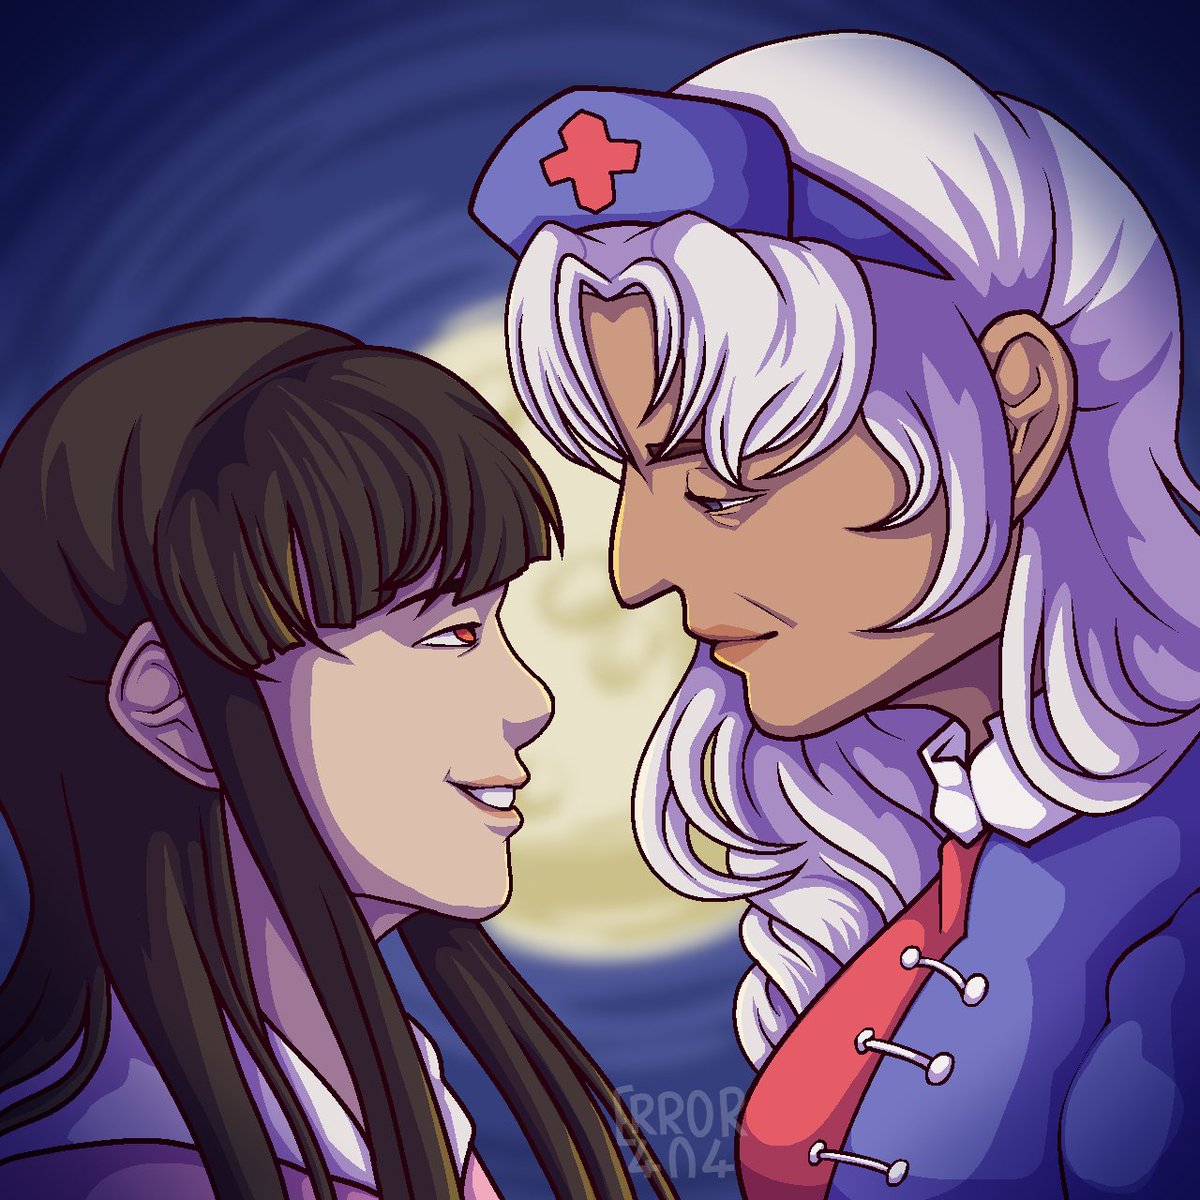 I also drew touhou lesbians for pride month 
#touhouproject #eiteru